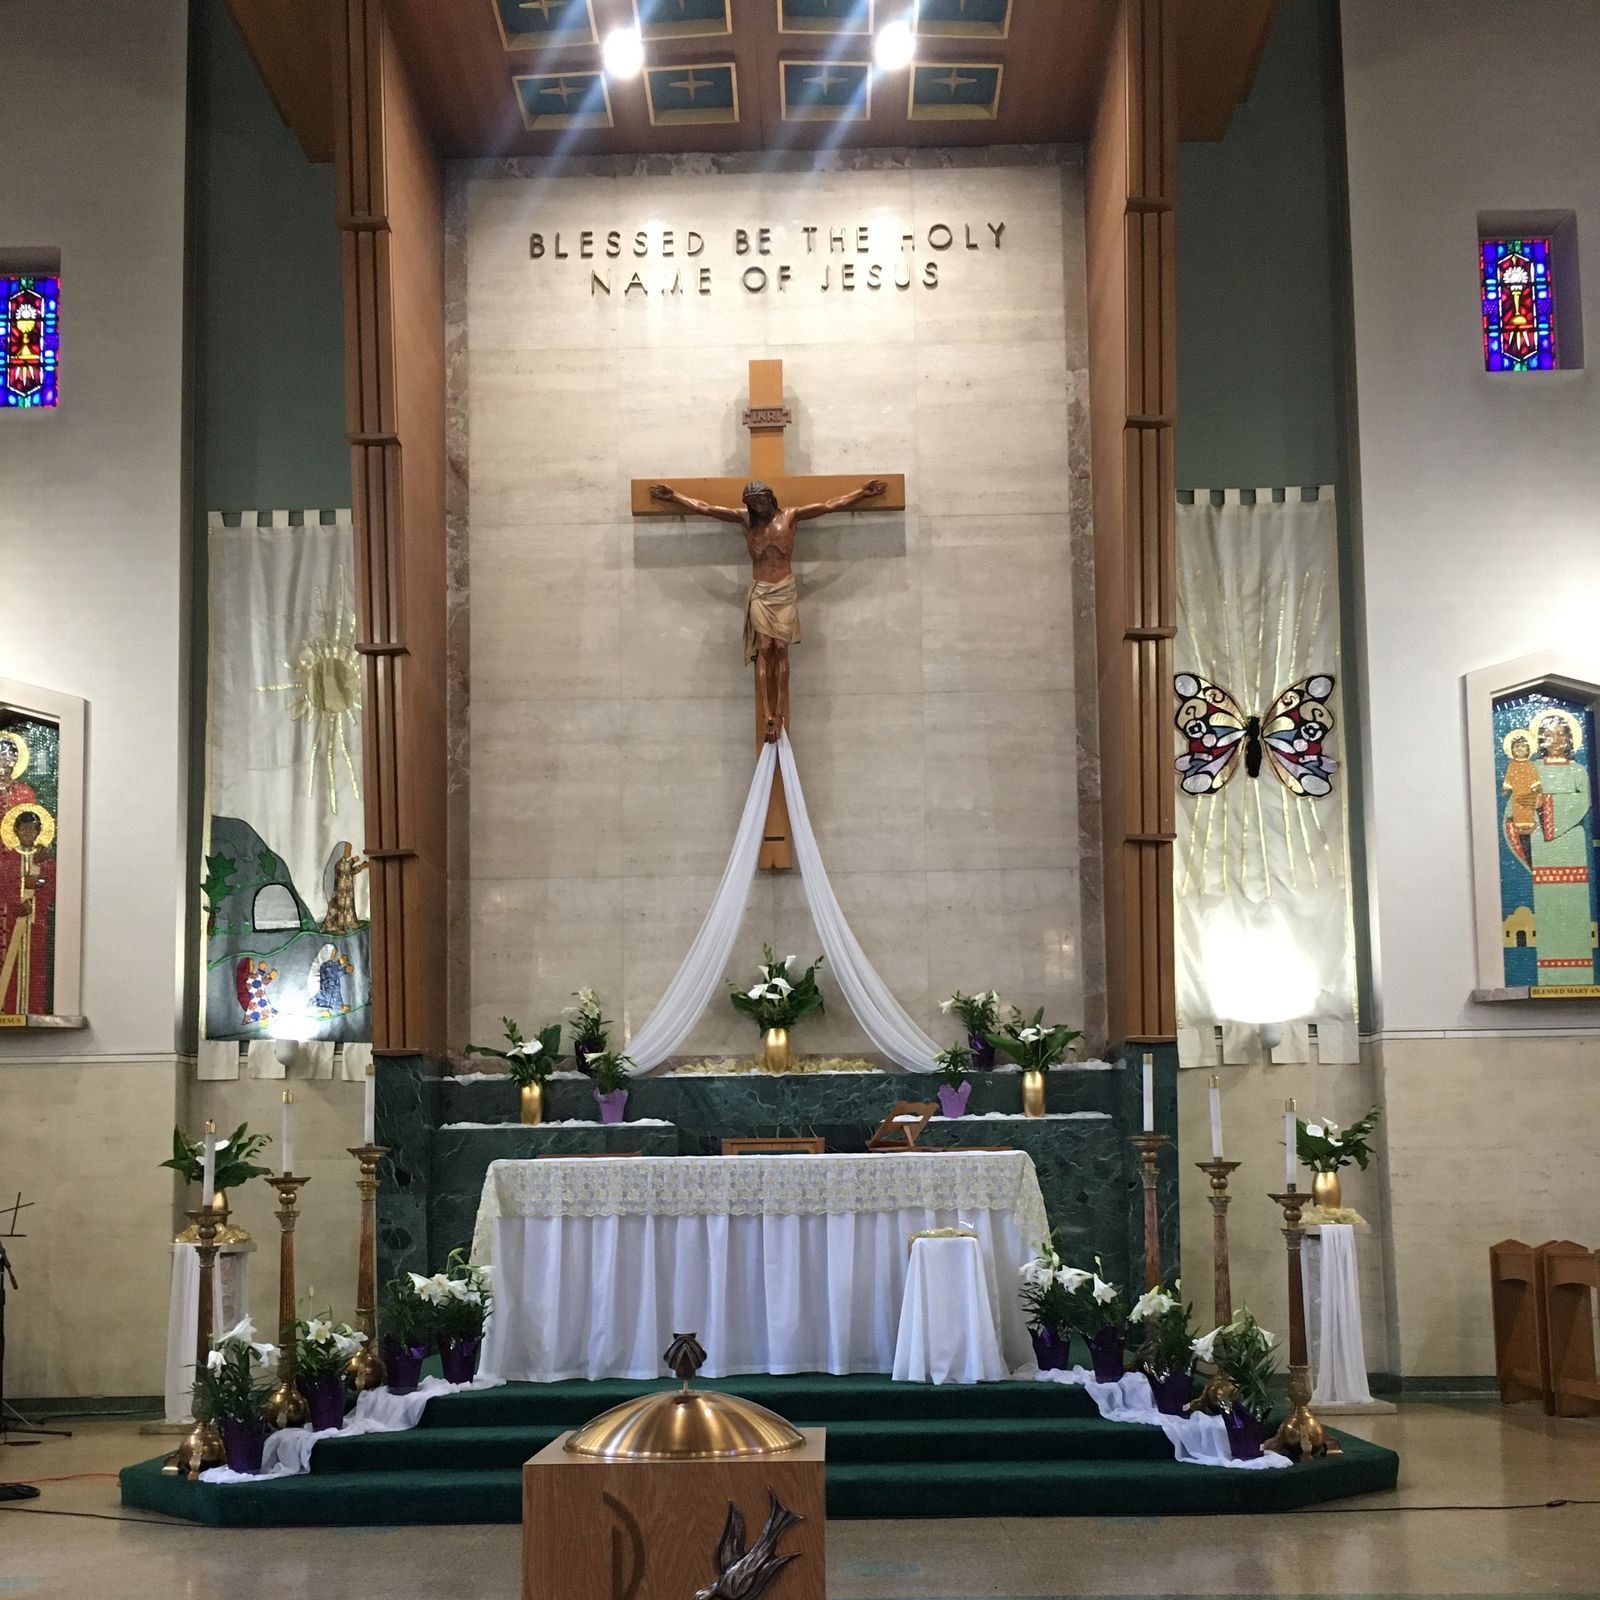 Holy Name of Jesus in Los Angeles celebrating centennial Mass tomorrow morning